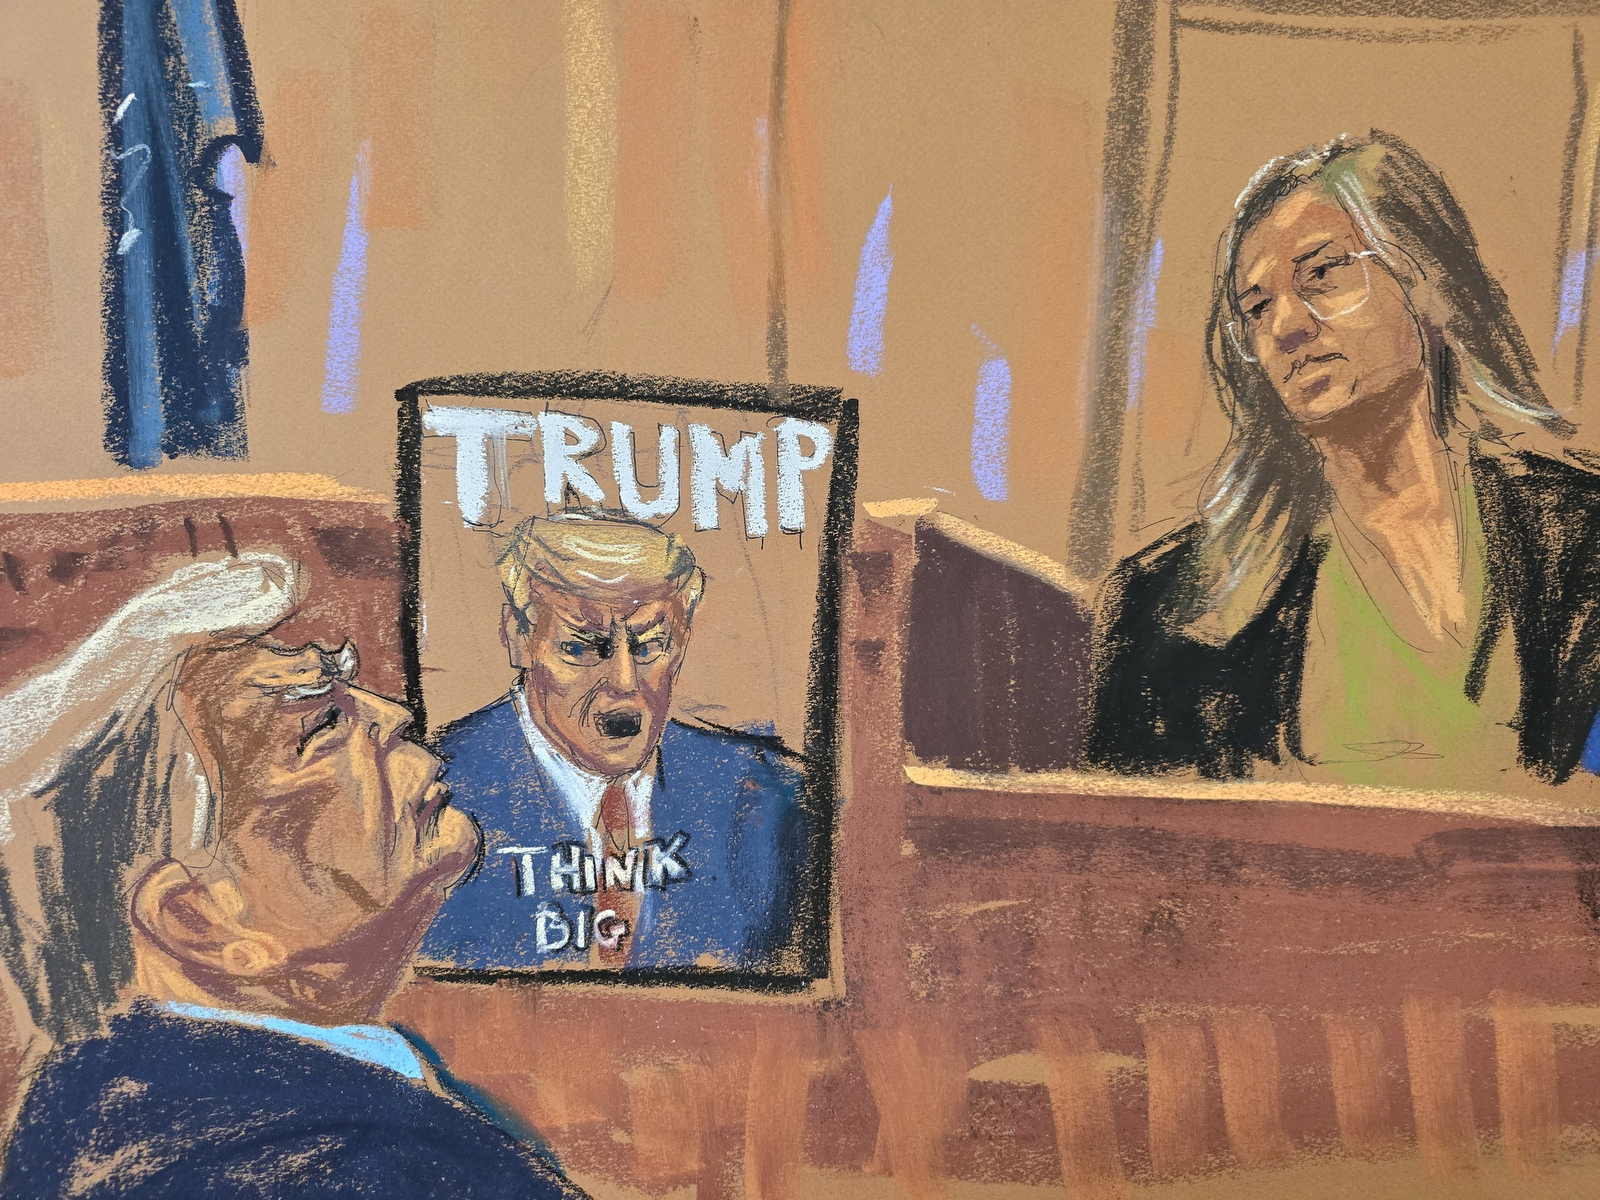 Tracey Menziez, the senior VP of production and creative operations for Harper Collins, testified in the Trump hush money criminal trial on May 9.